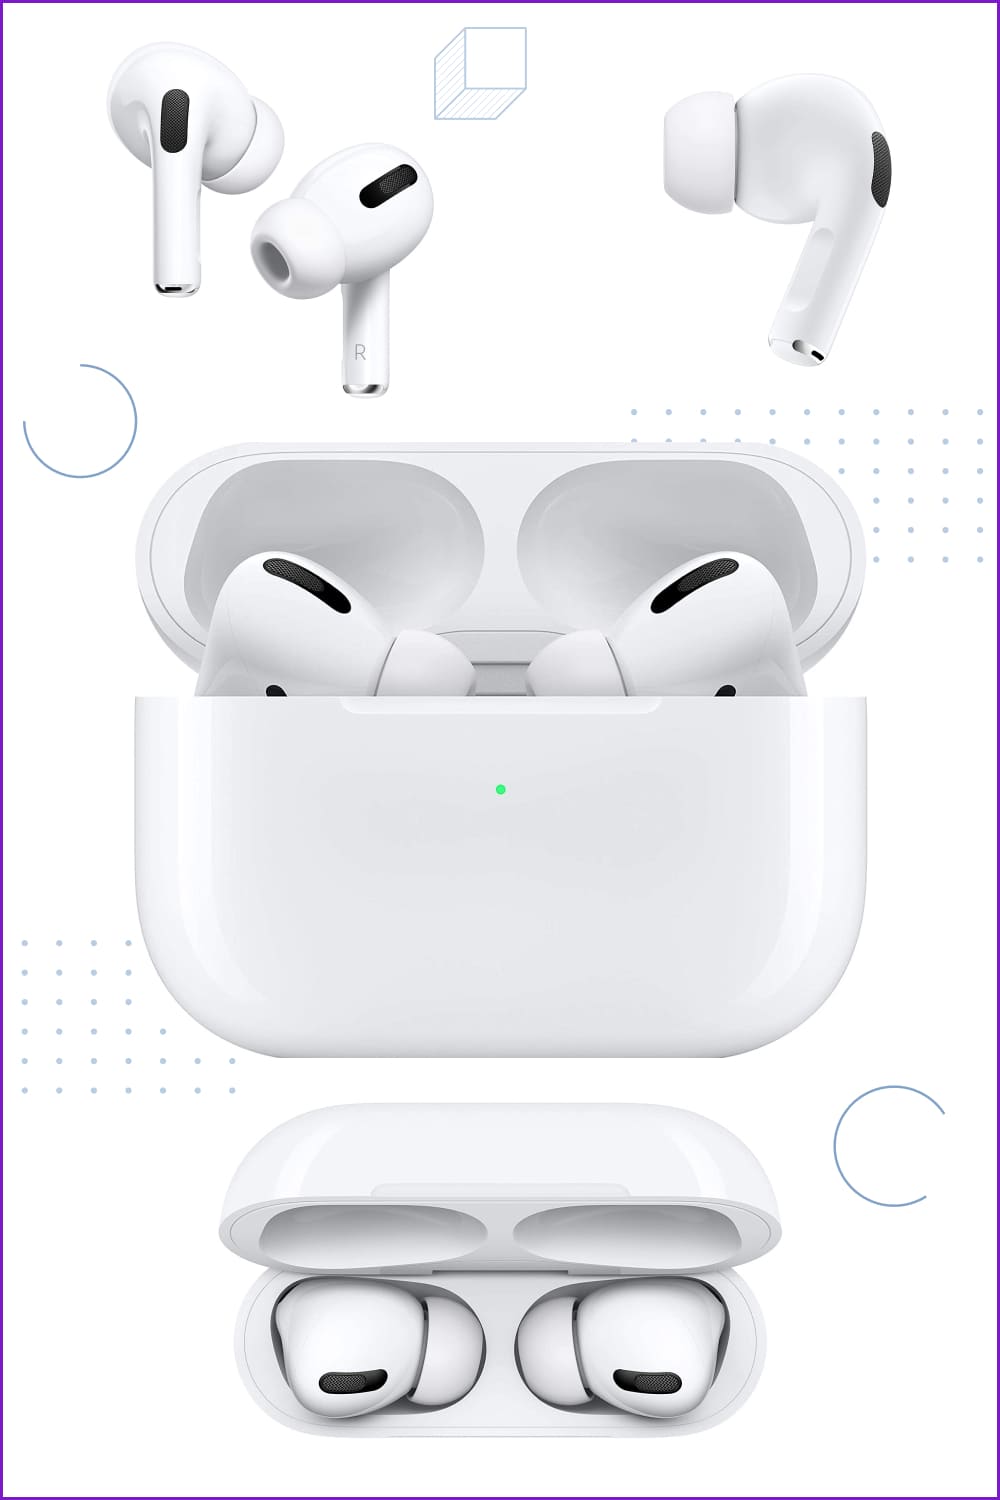 White Apple airpods in case.